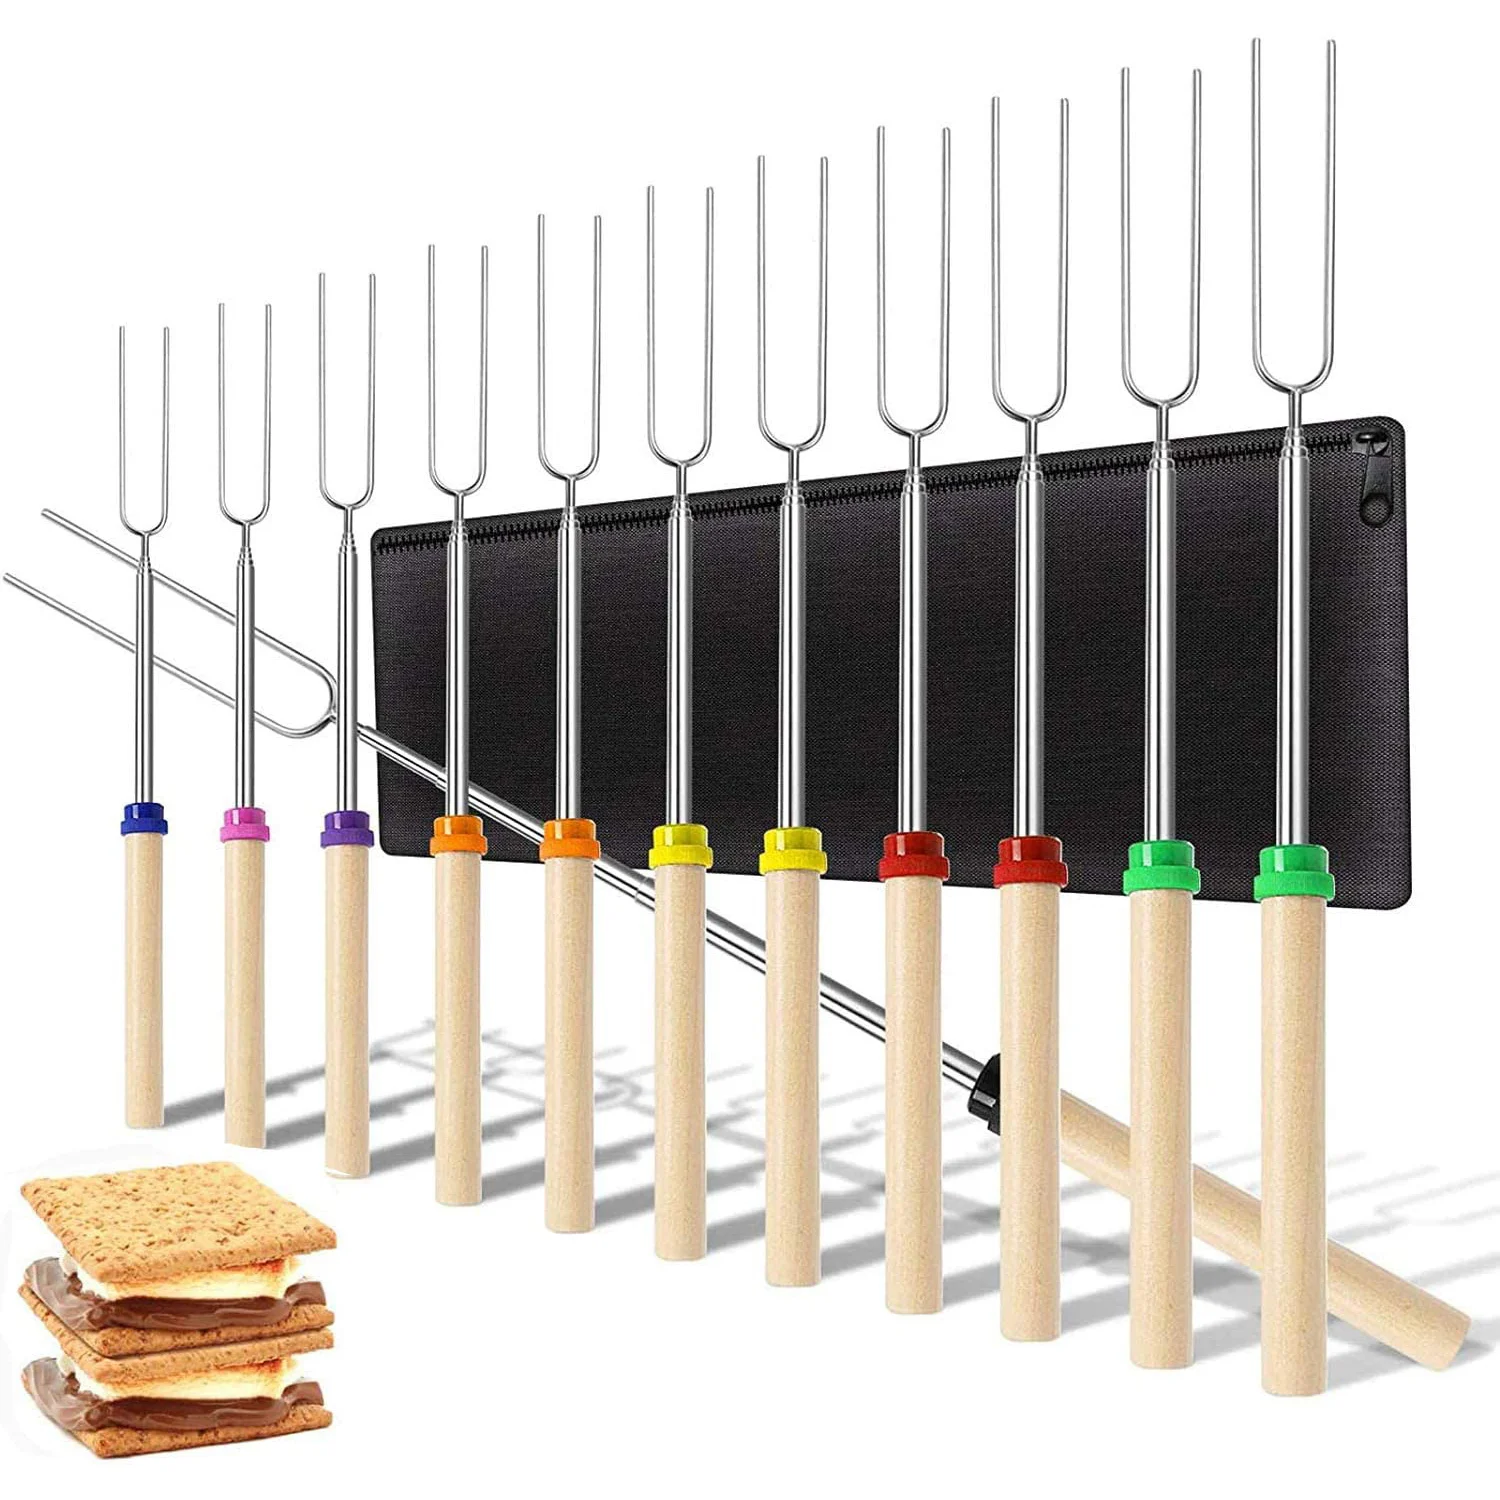 

Amazon Hot Selling 32 Inch Extendable Marshmallow Roasting Sticks Hot Dog Forks Smores Sticks Stainless Steel Skewers, Customizable